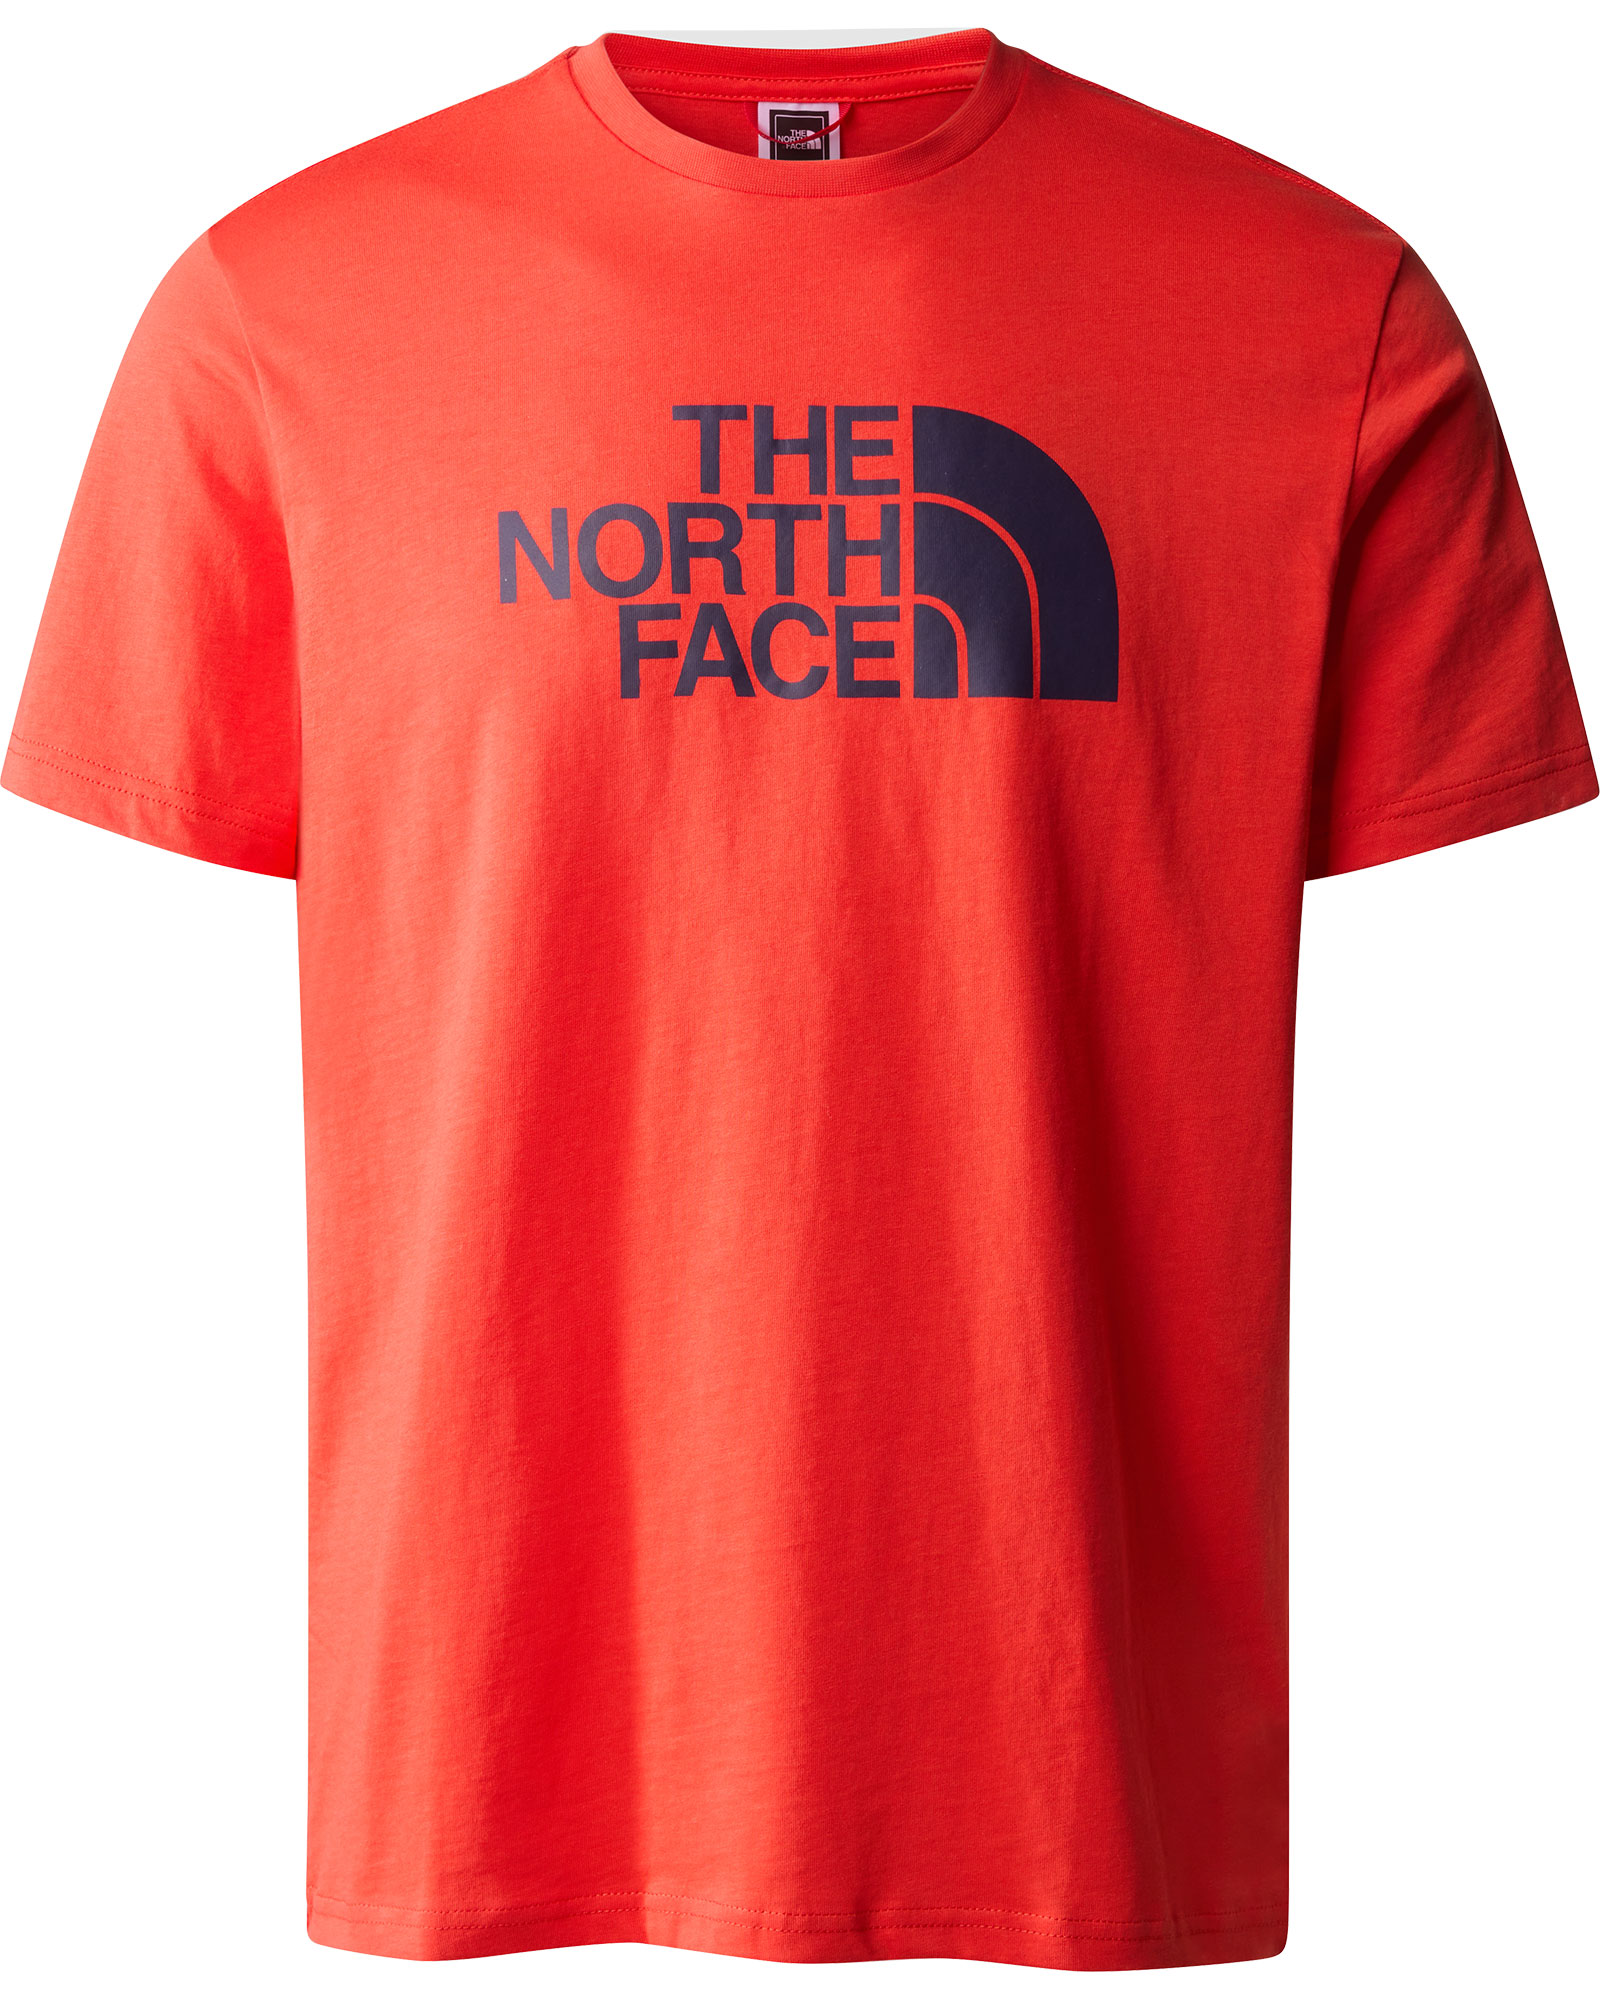 The North Face Easy Men’s T Shirt - Fiery Red XXL